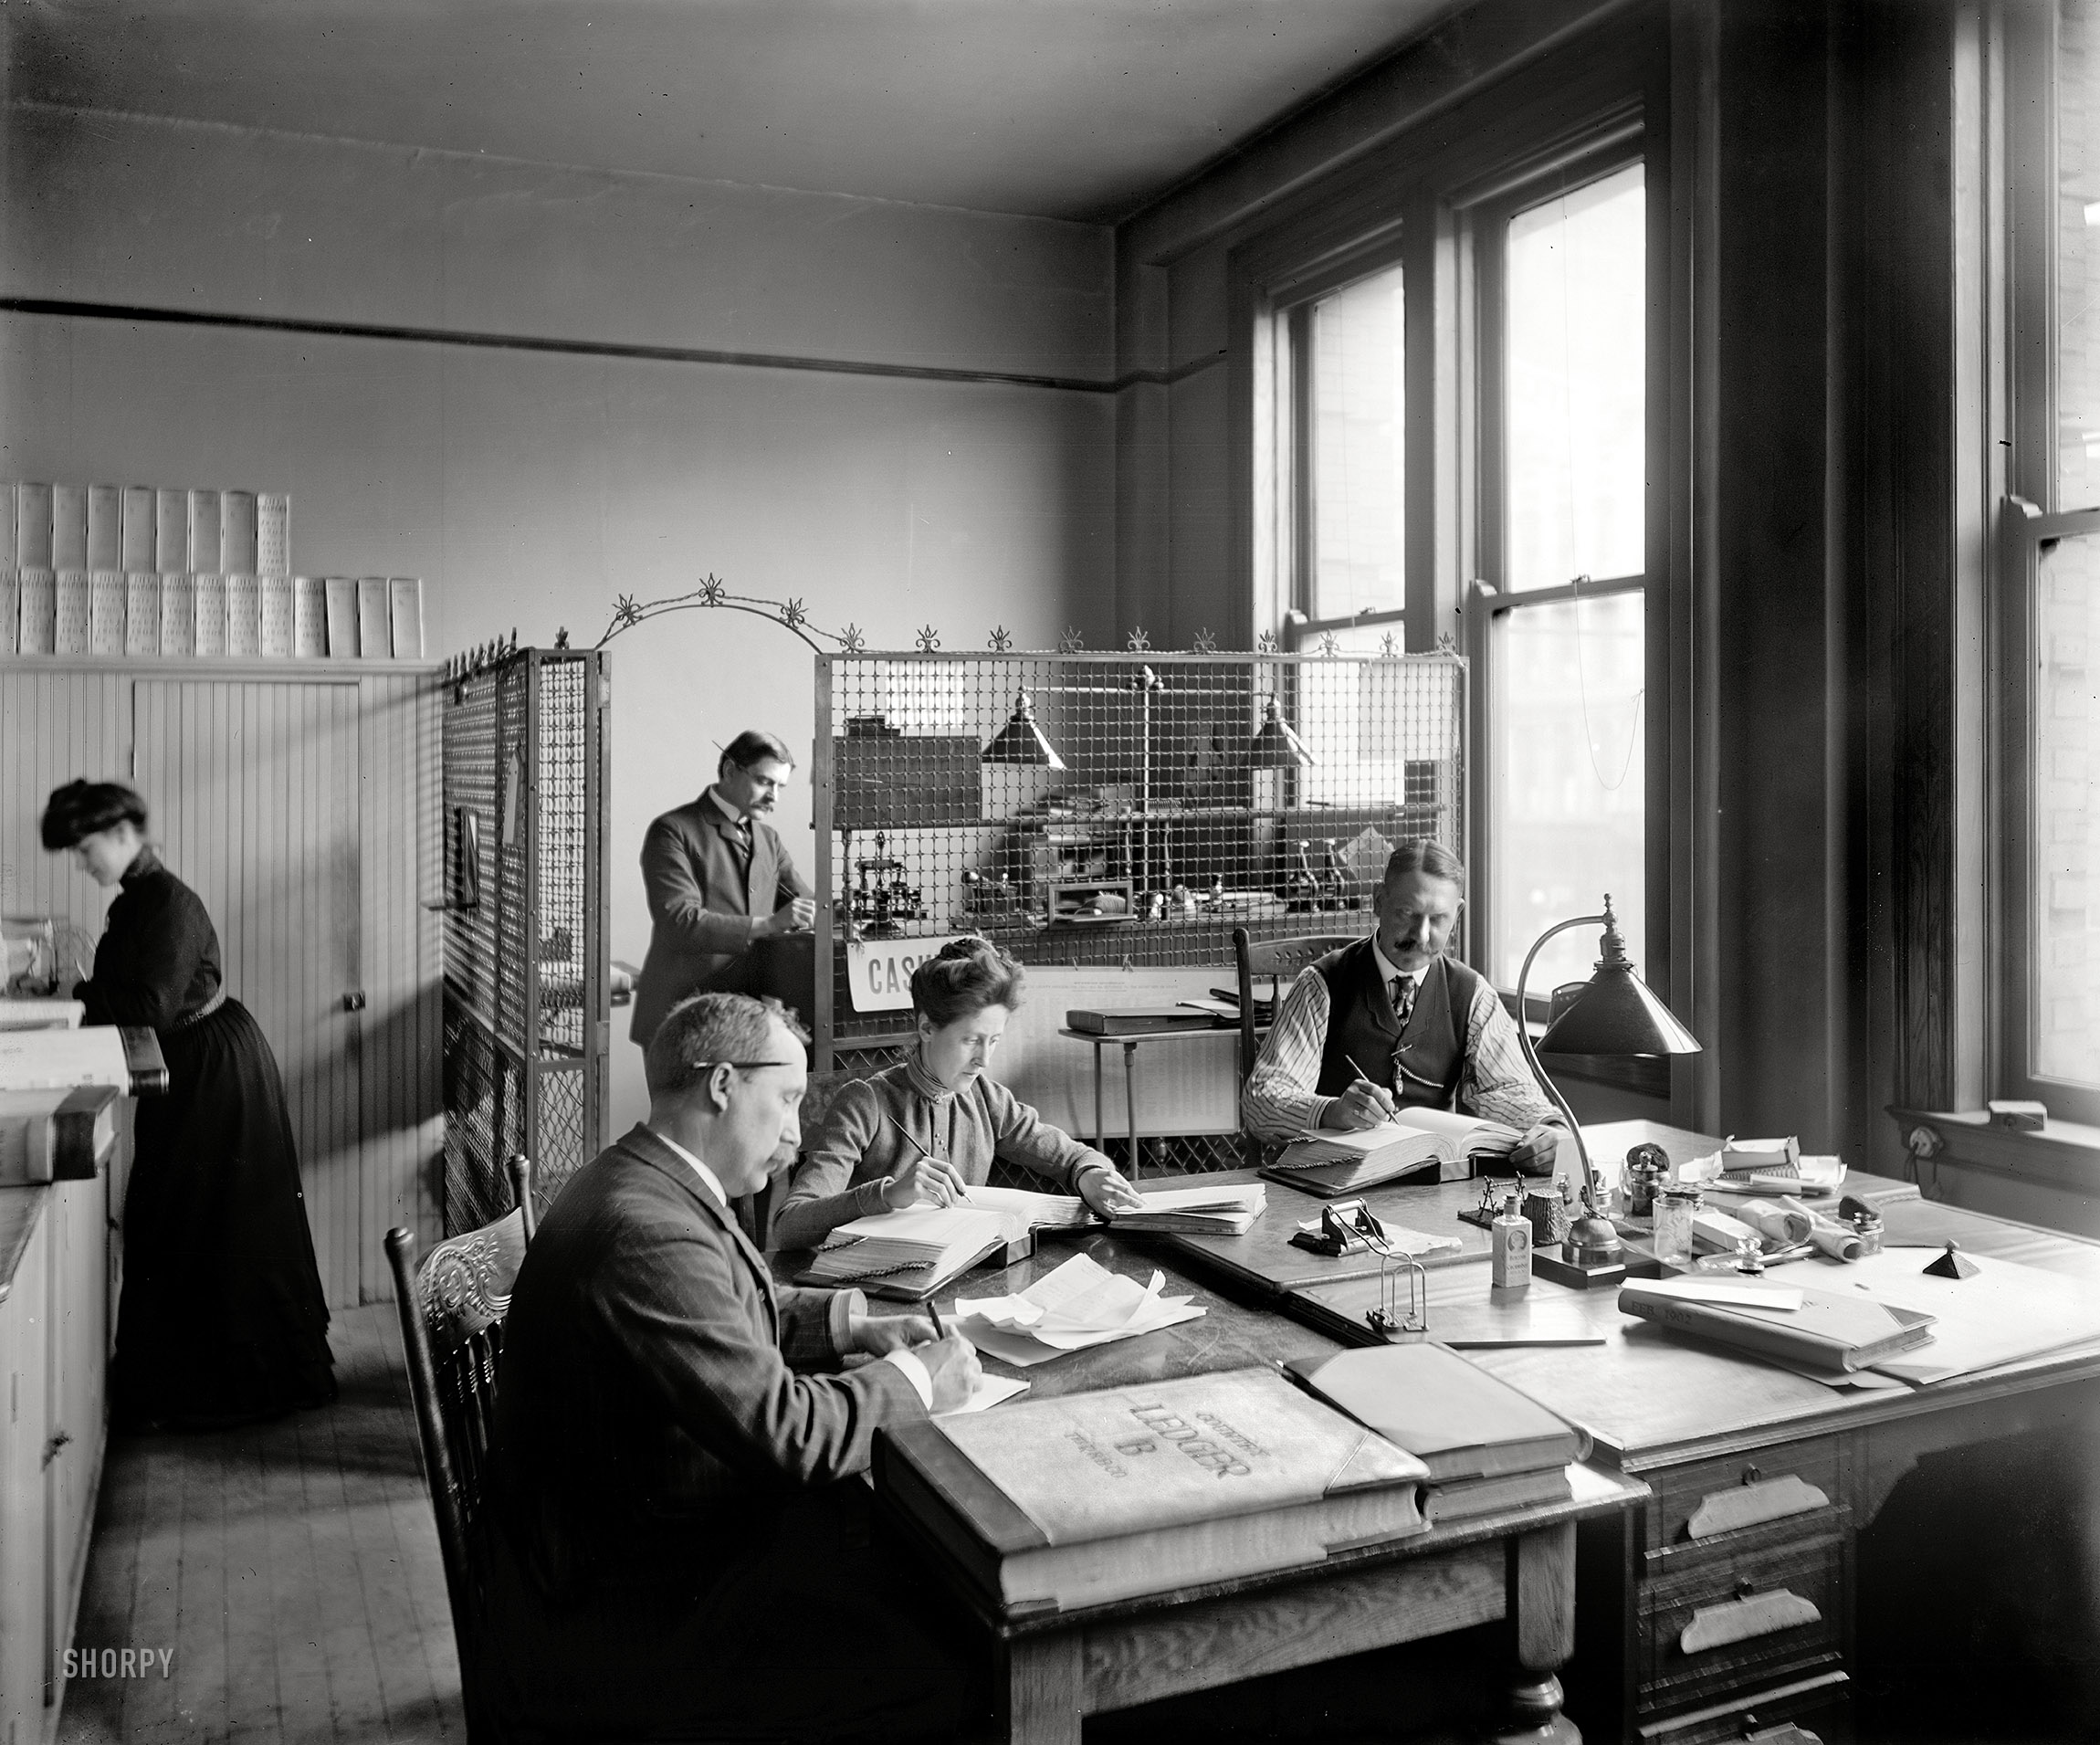 1902. "Cashier cage -- Richmond & Backus Co., Detroit." Another peek behind the scenes at this printing and bindery business. 8x10 glass negative. View full size.